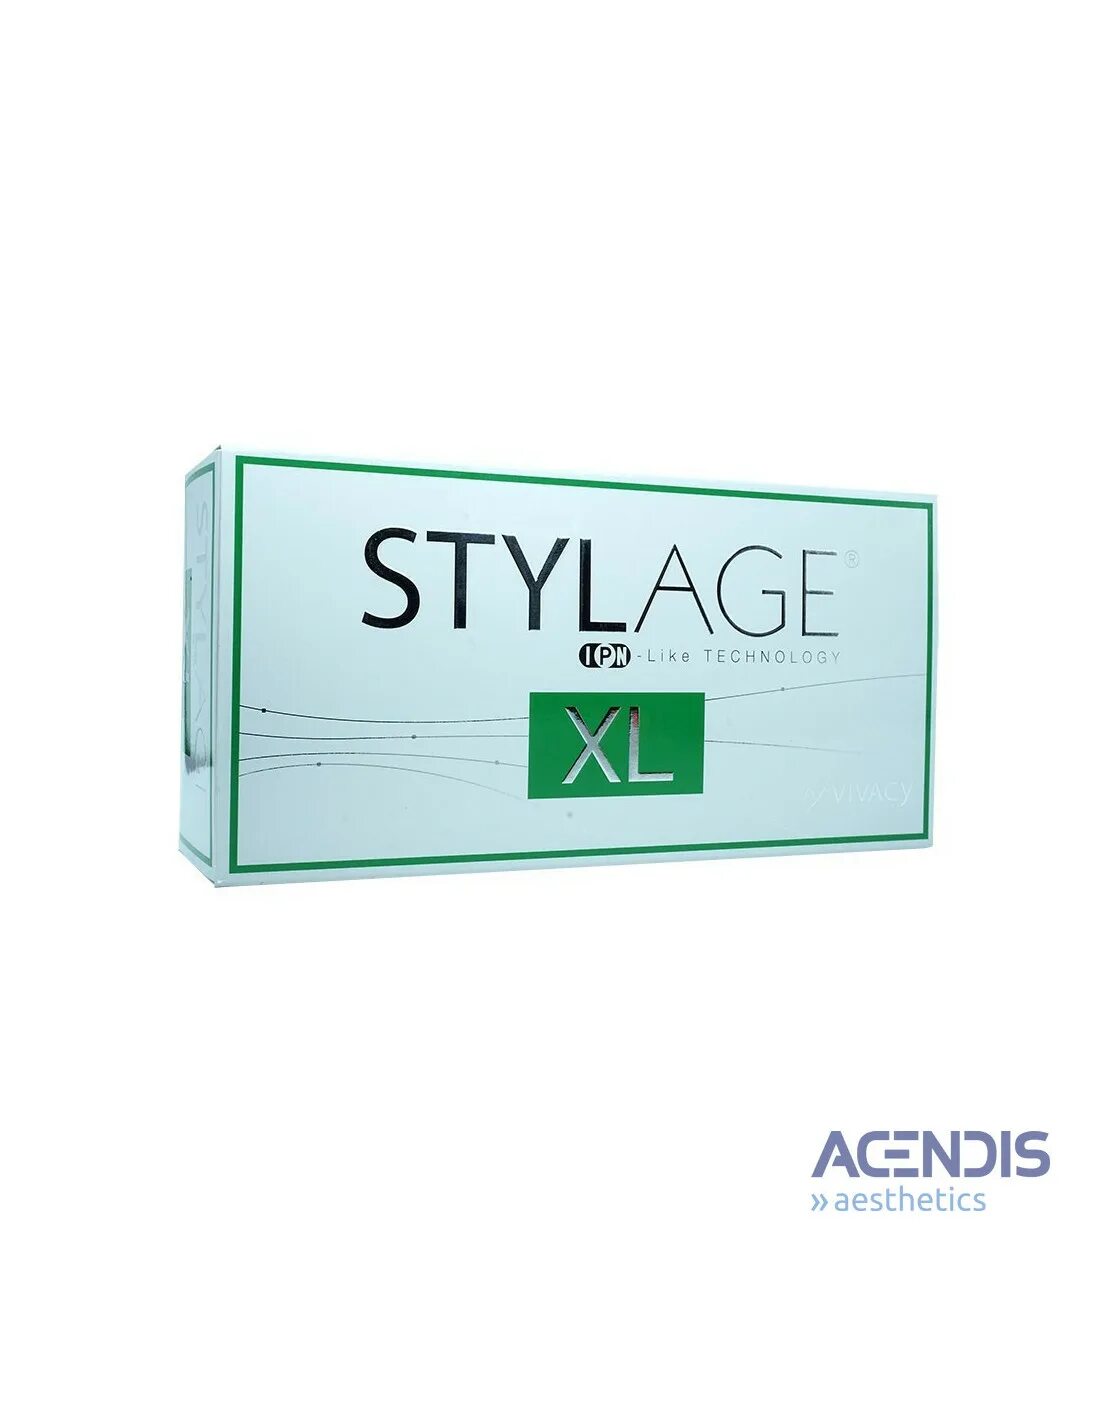 Stylage m цена. Stylage филлер 1.1. Stylage XL. Стеллаж XL филлер. Стилаж Stylage филлер.